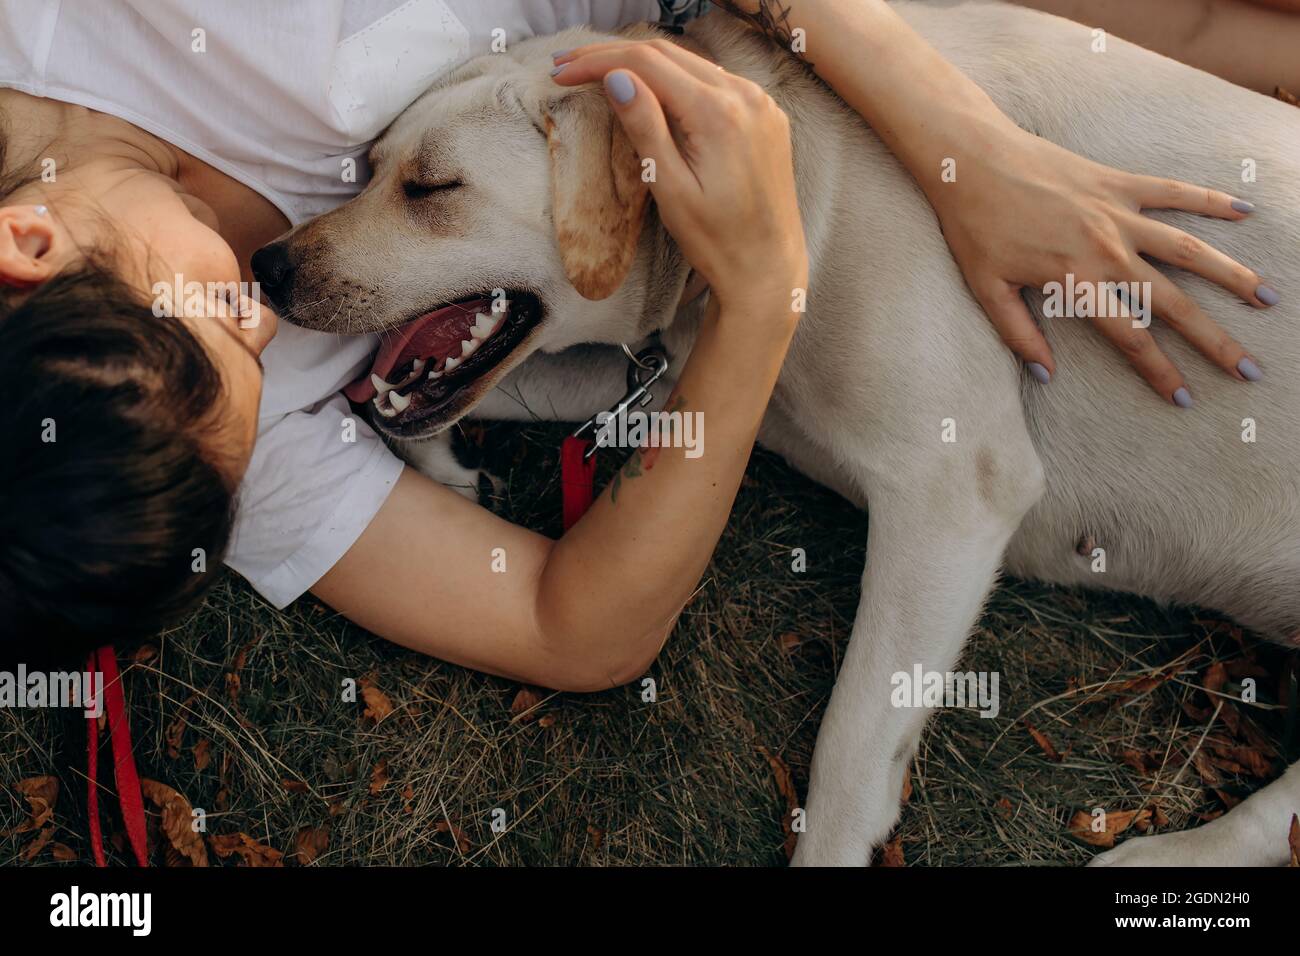 Woman hugging her Labrador outdoors. Lifestyles and pet care concept. Stock Photo